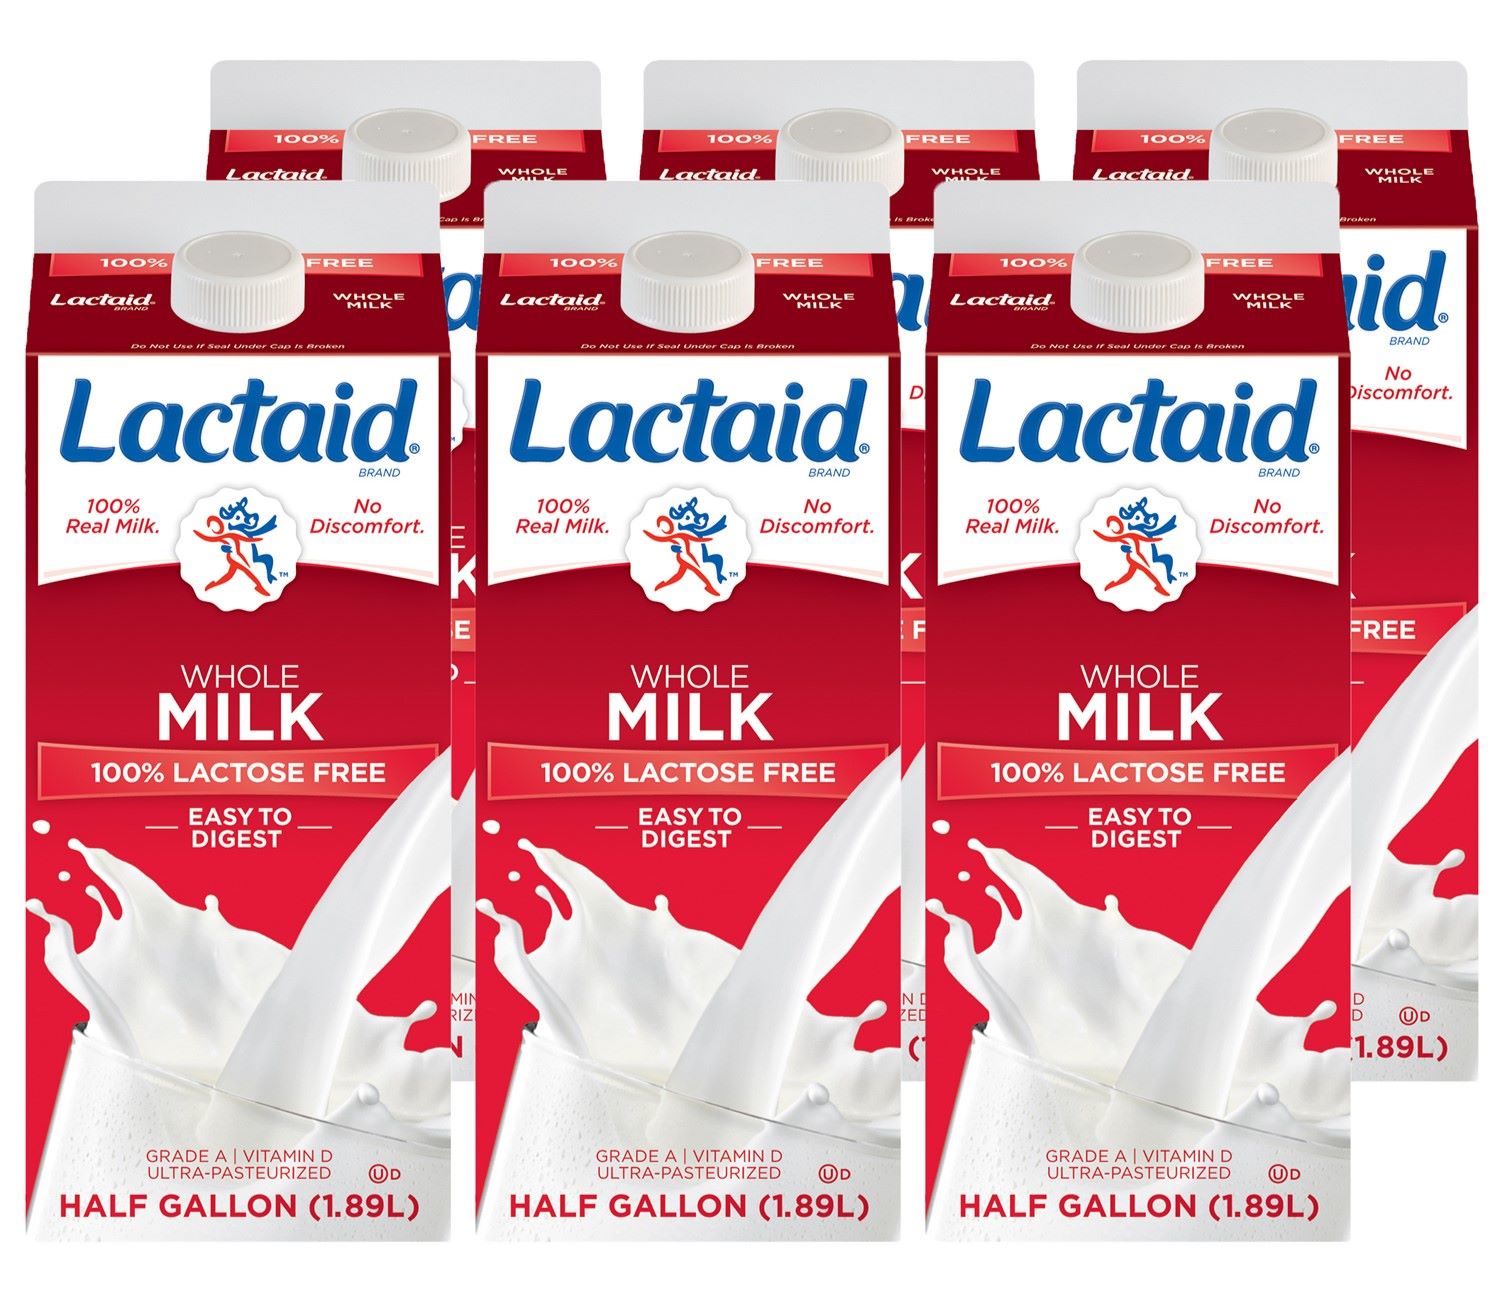 11-lactaid-milk-nutrition-facts